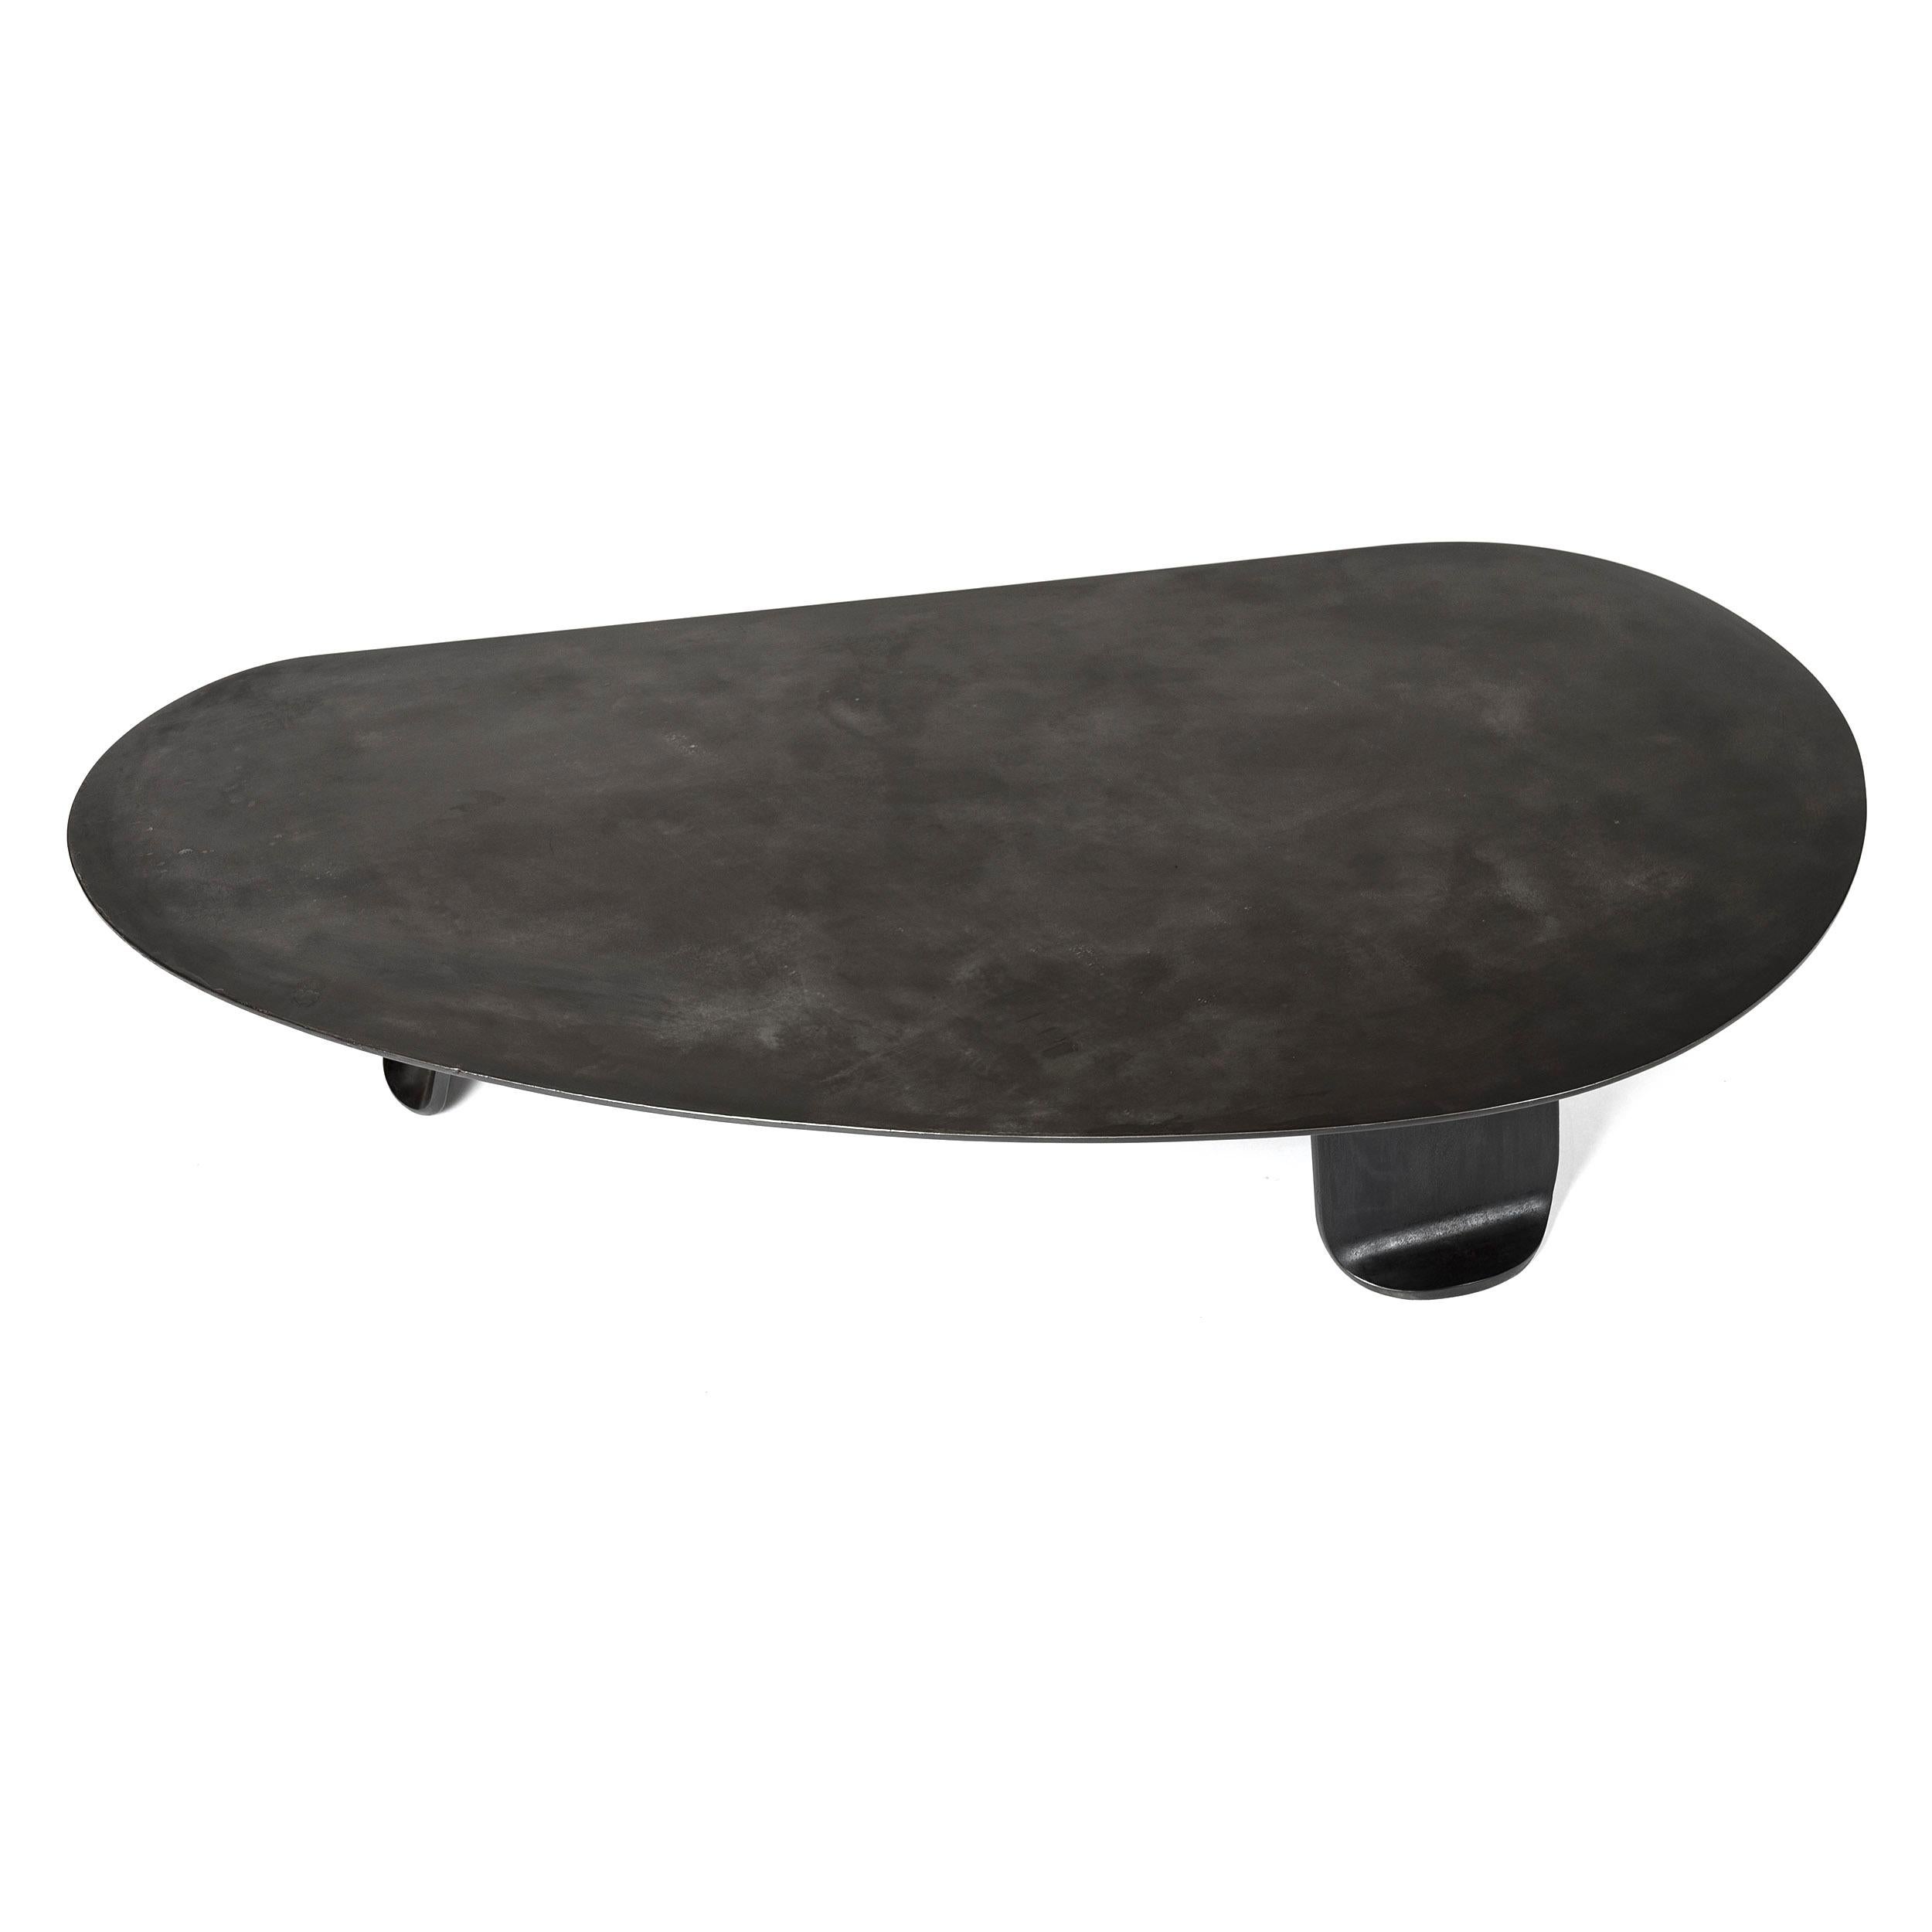 WYETH Chrysalis Table No. 1 in Patinated Steel with Hot Zinc Finish In New Condition For Sale In Sagaponack, NY